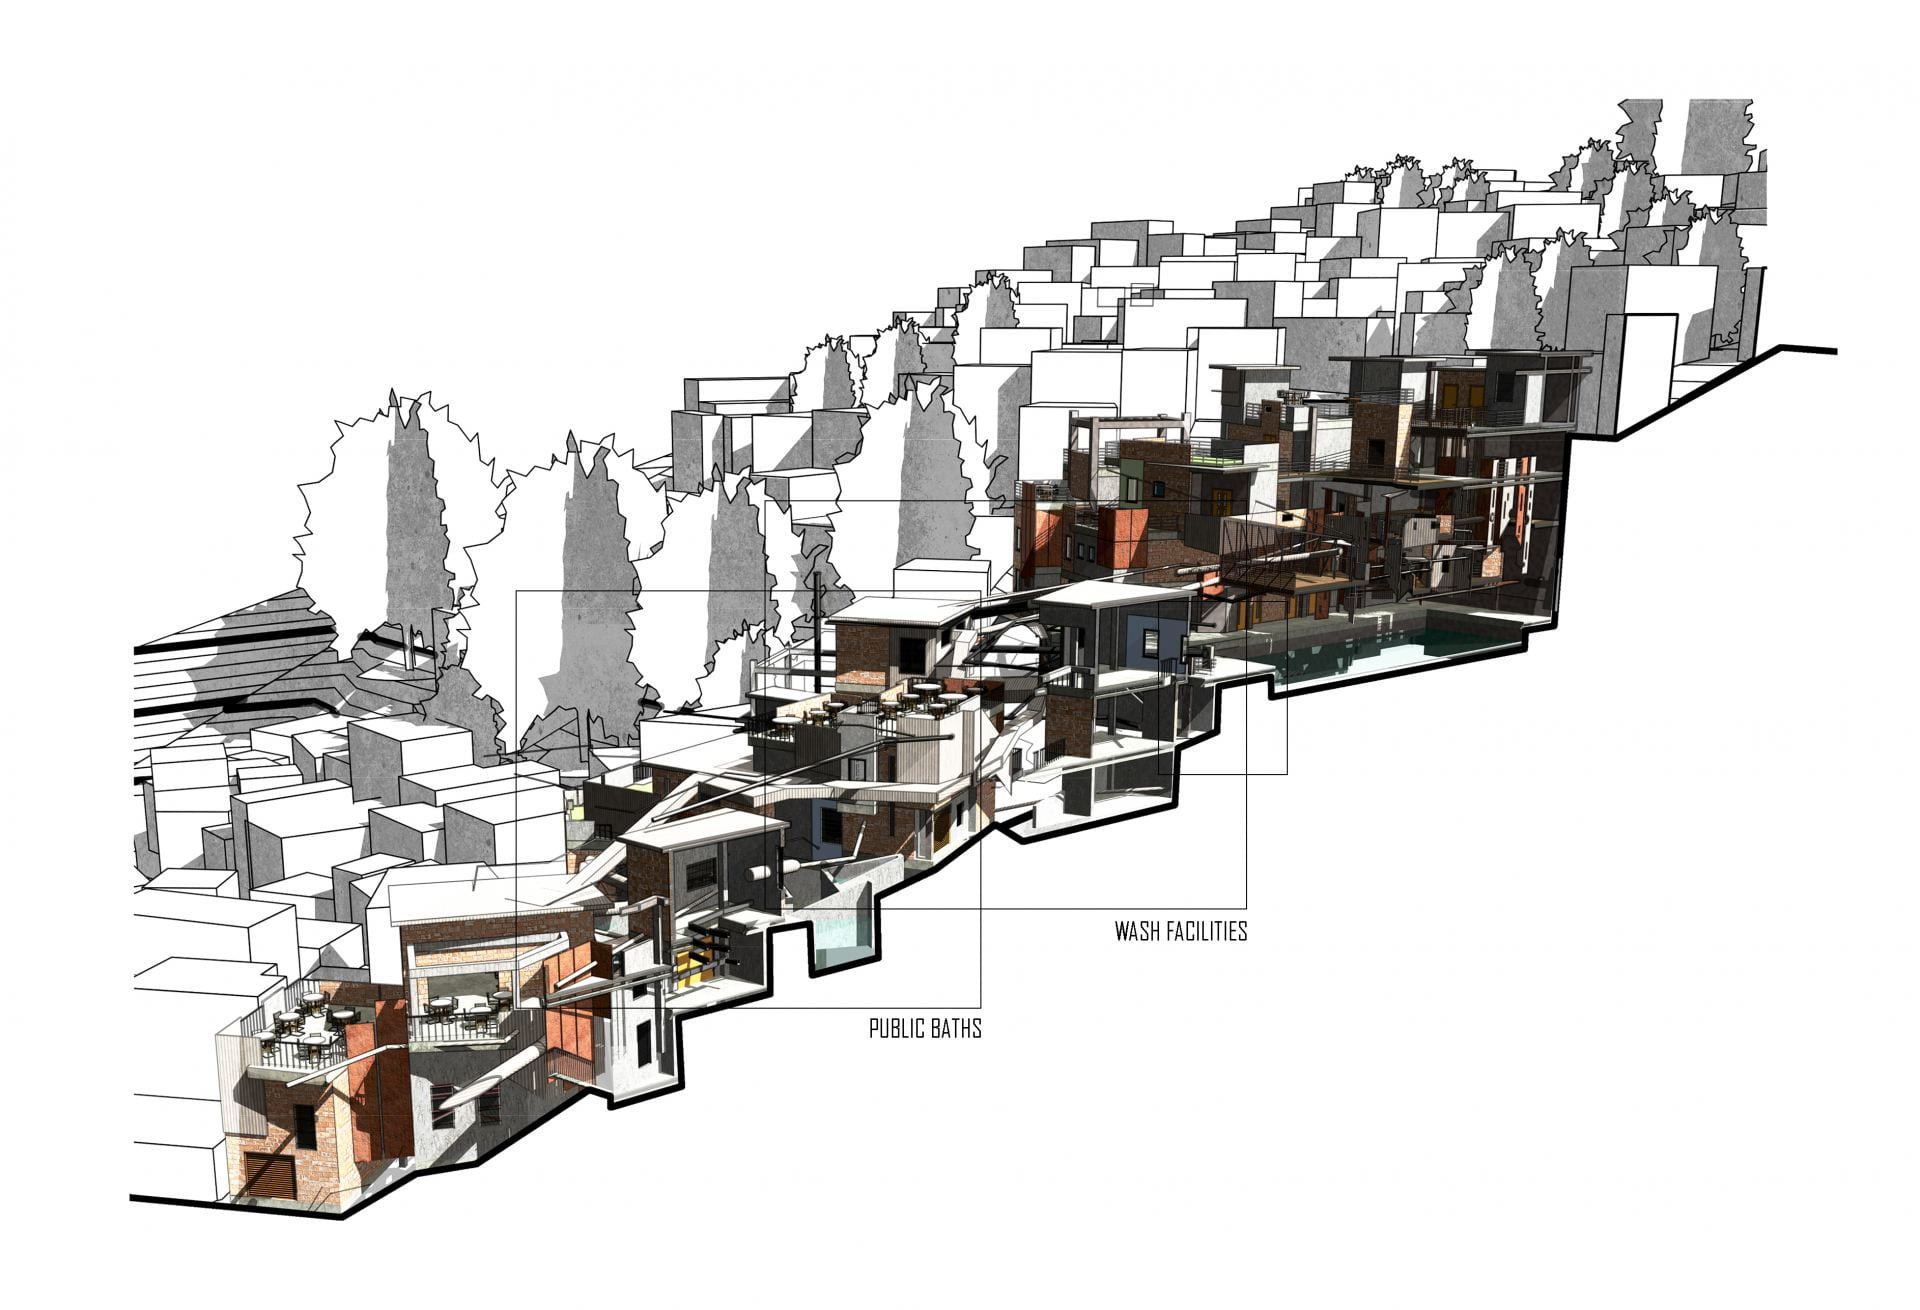 The development is deconstructed throughout the site to ensure the small scale repetitive architectural language of the favela is maintained.